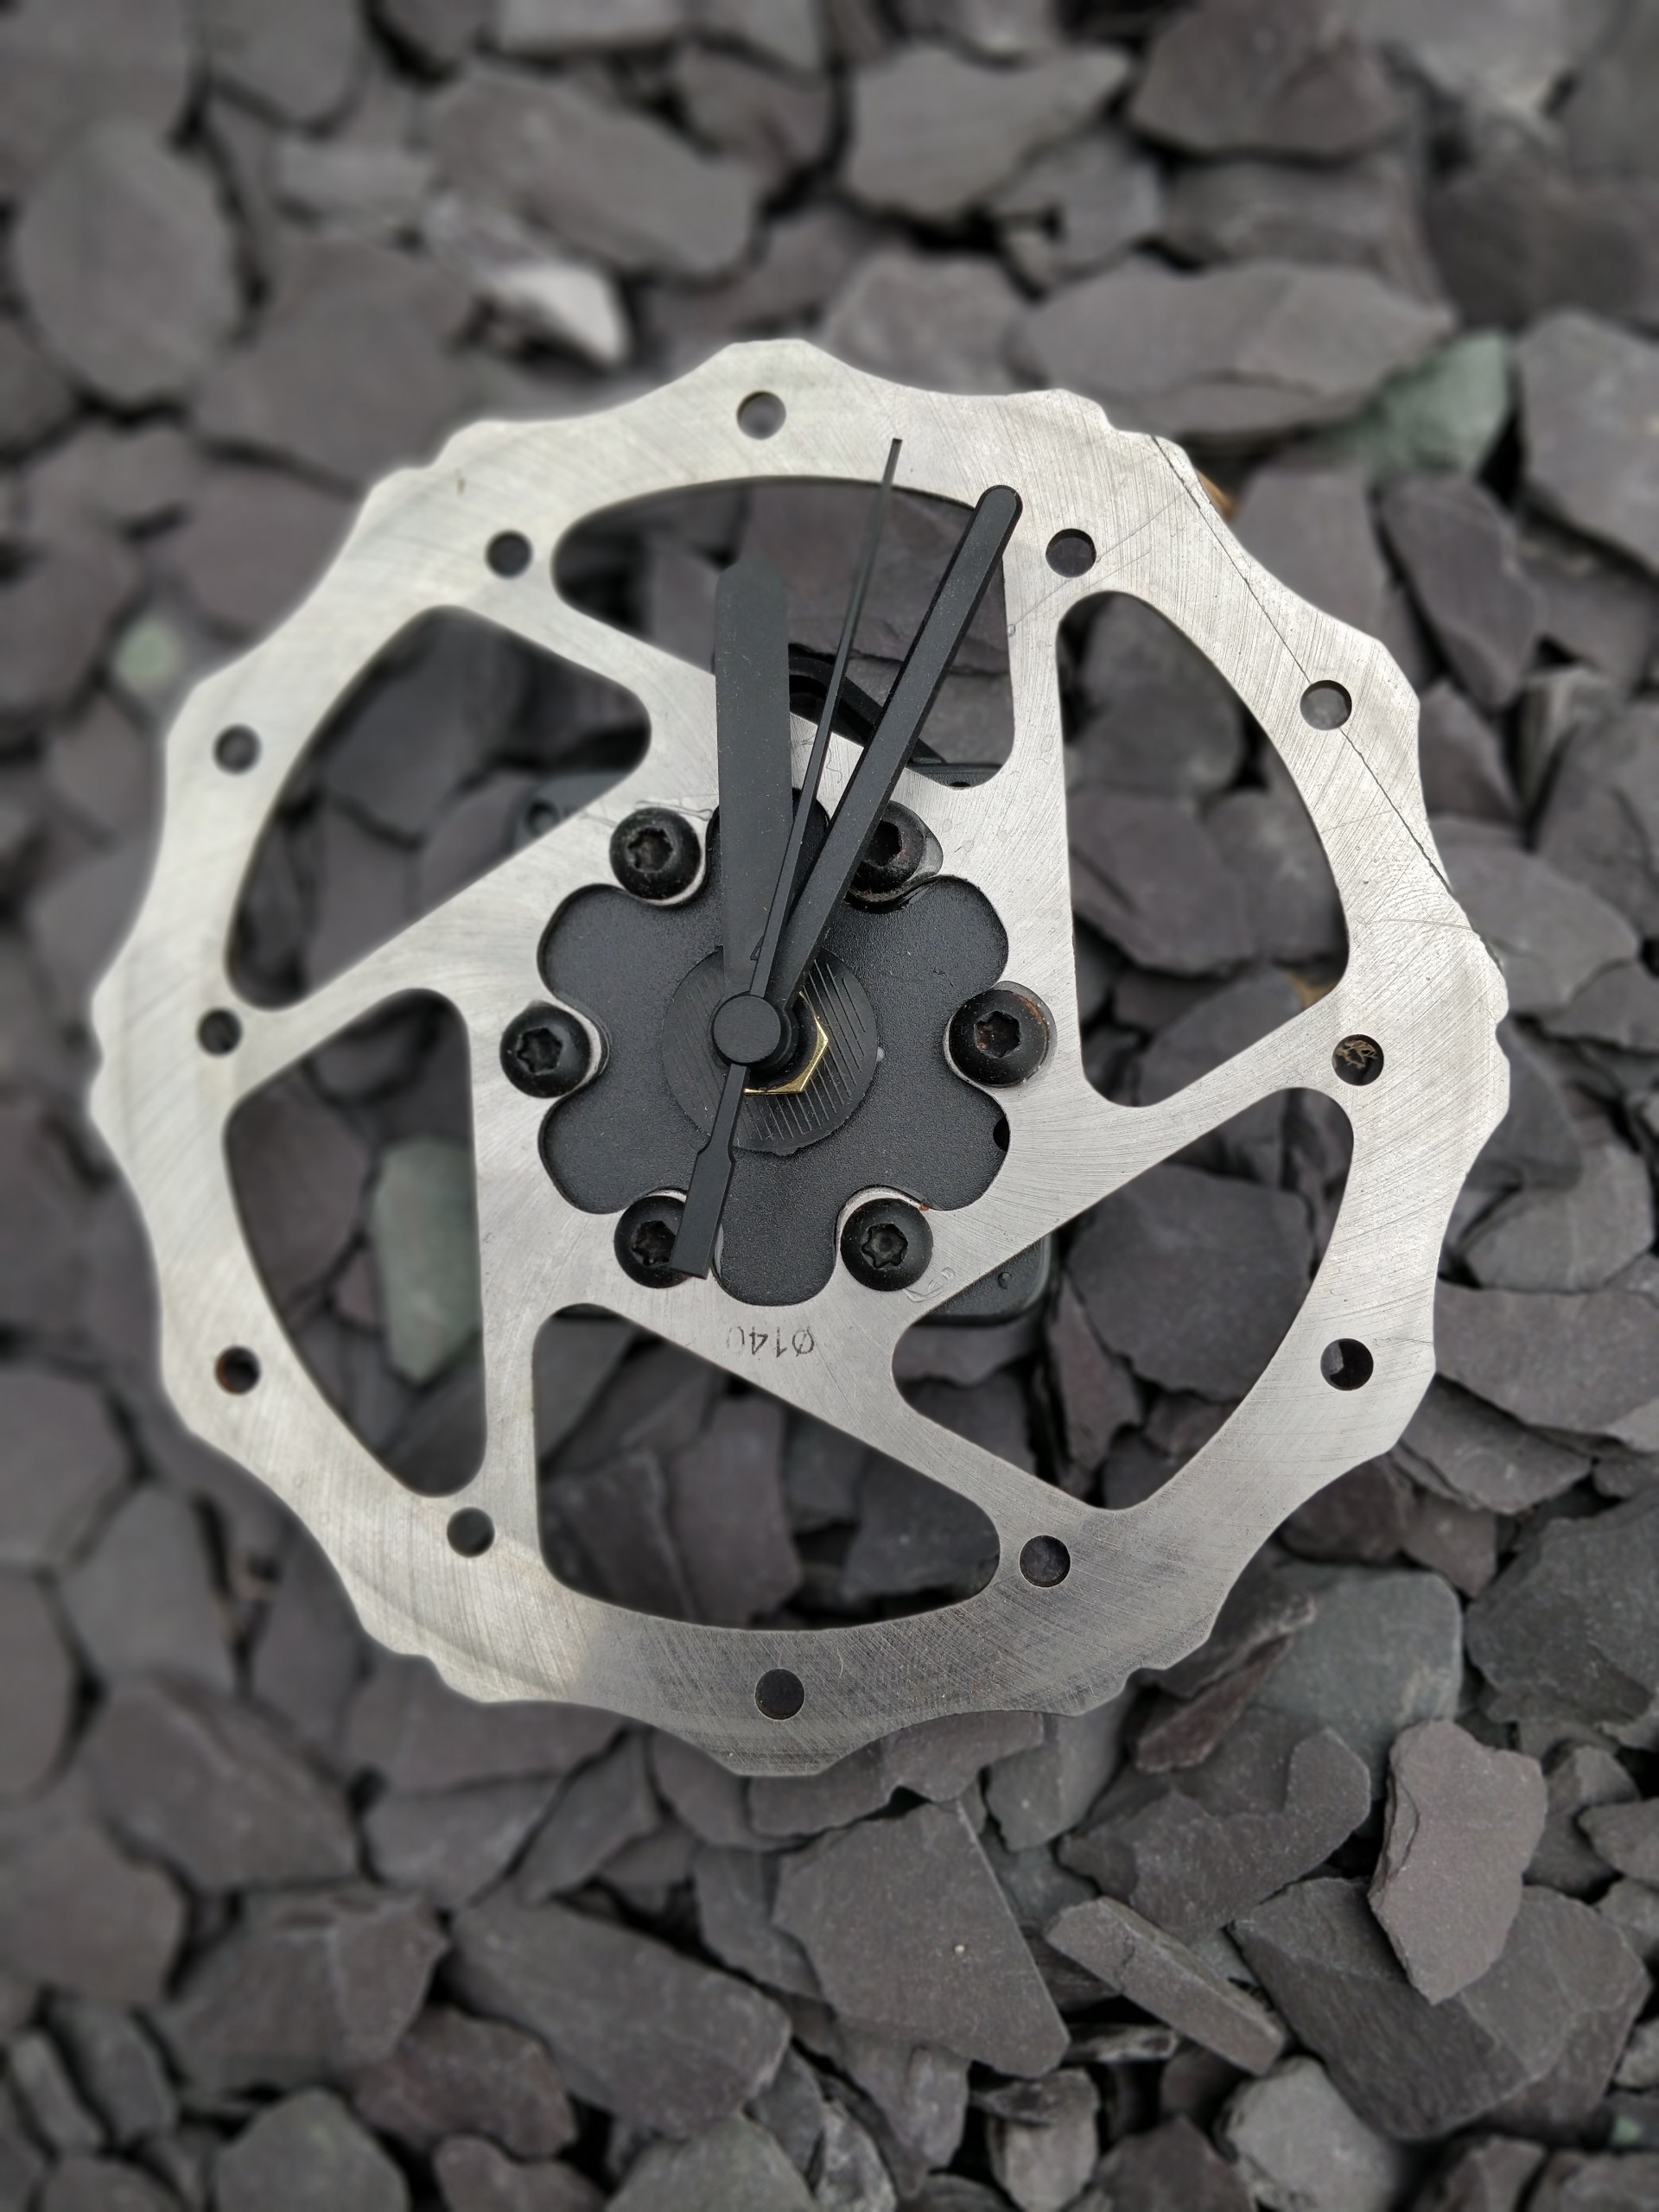 Disc brake rotor clock from Outfit Moray Bike Revolution